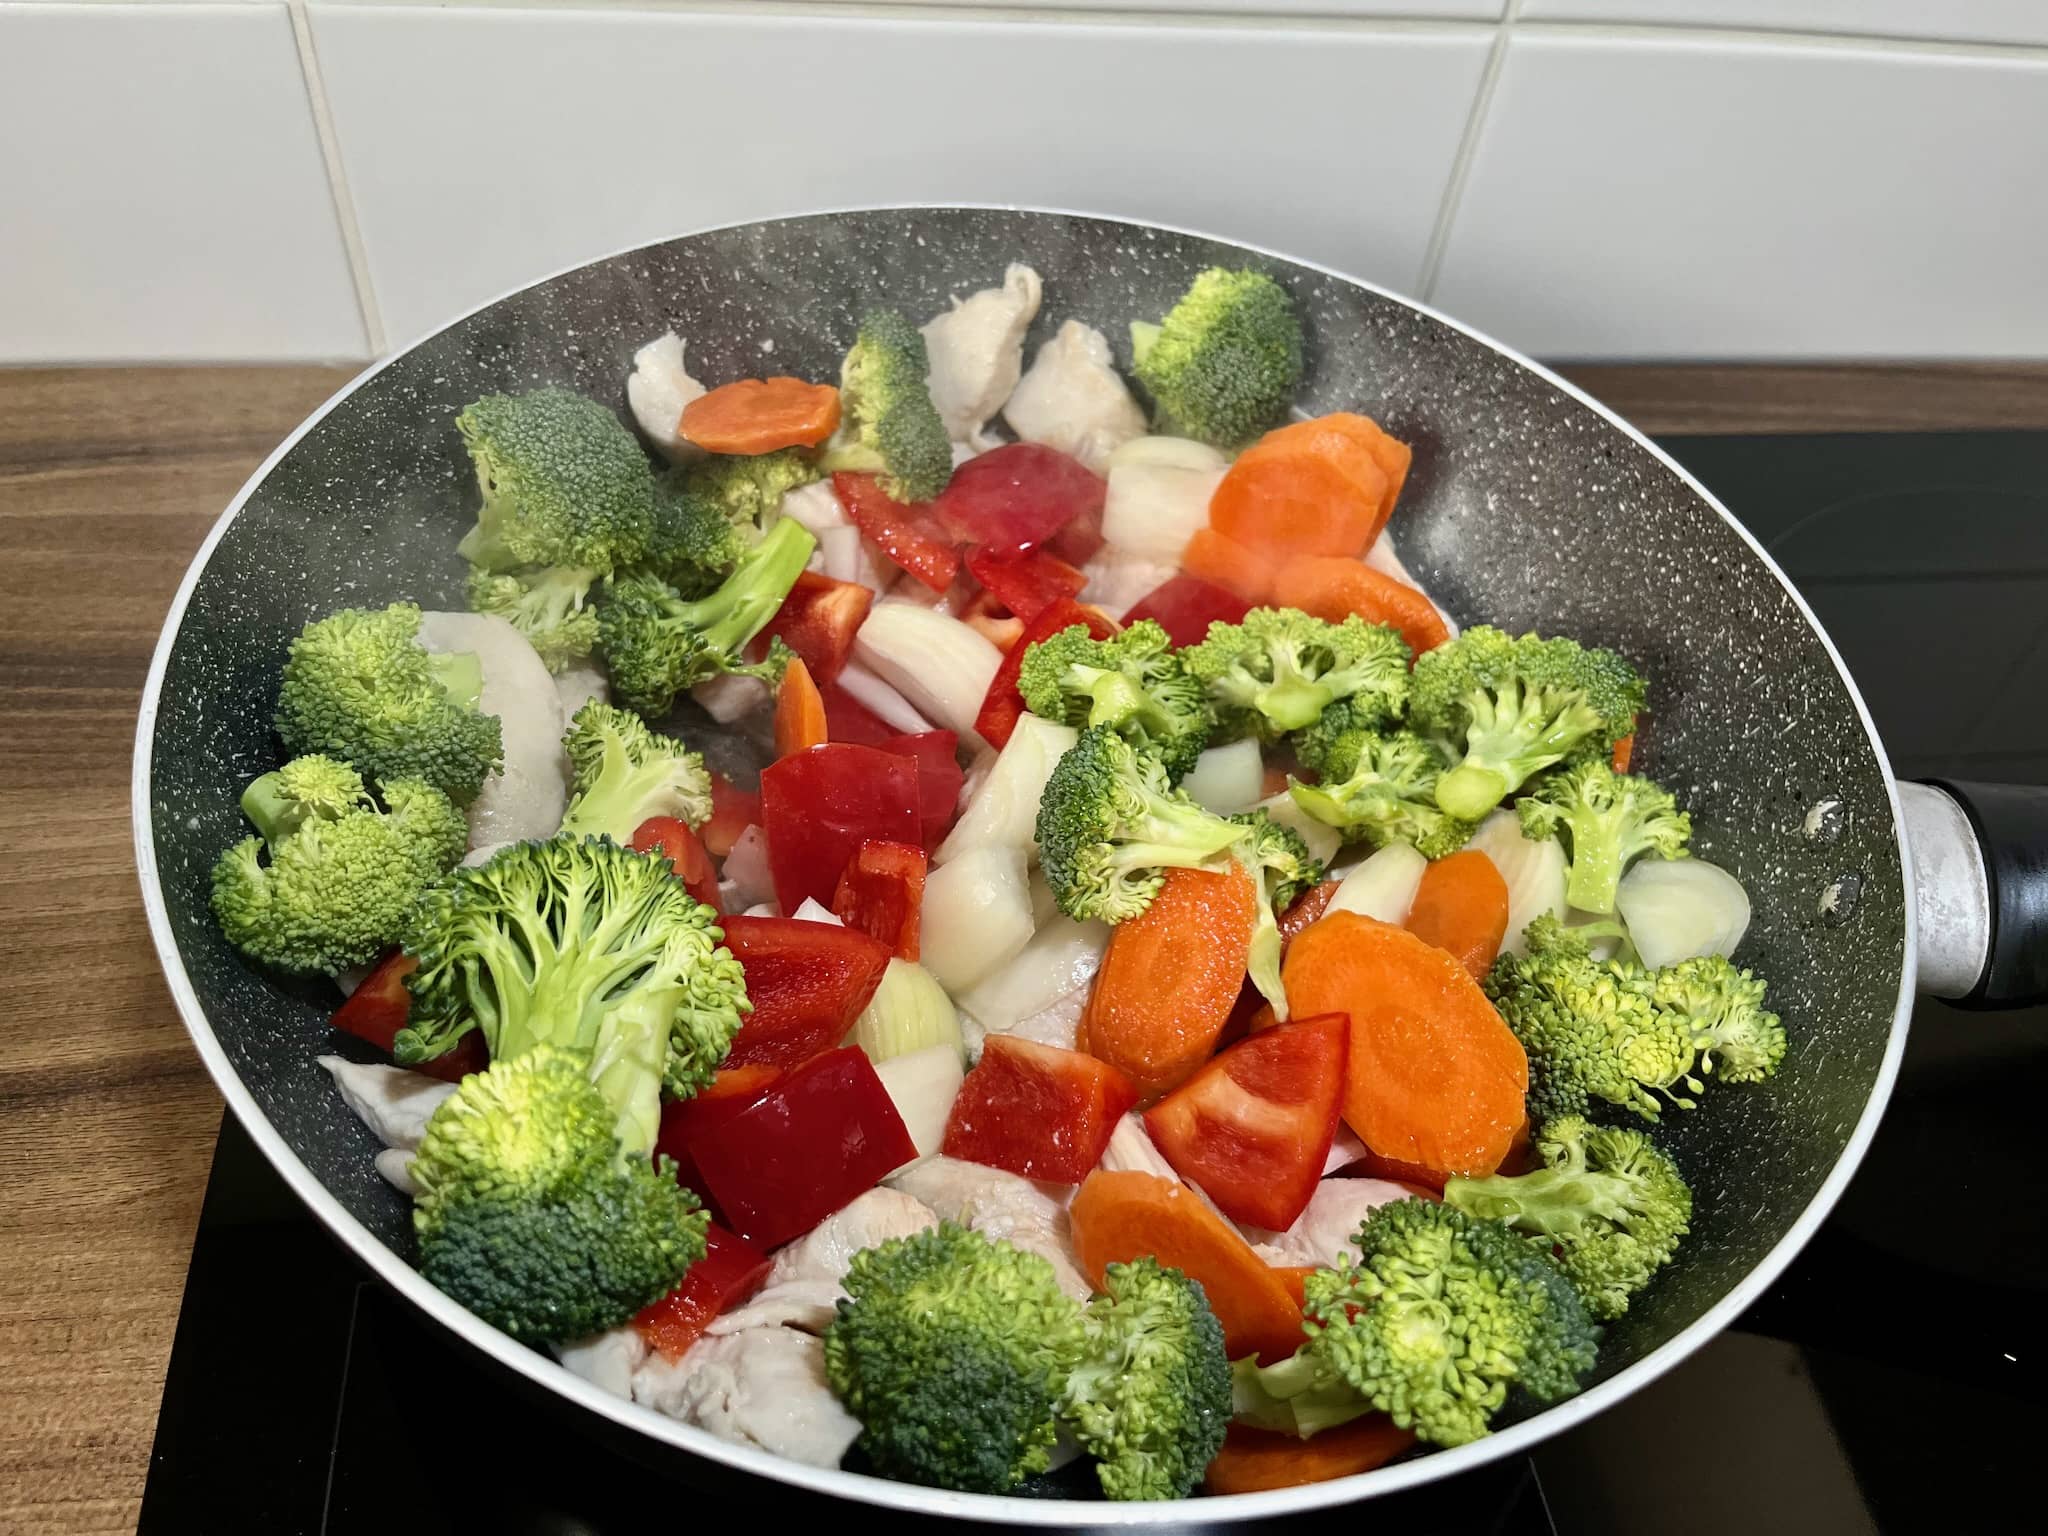 Chicken breast in a pan with vegetables on top